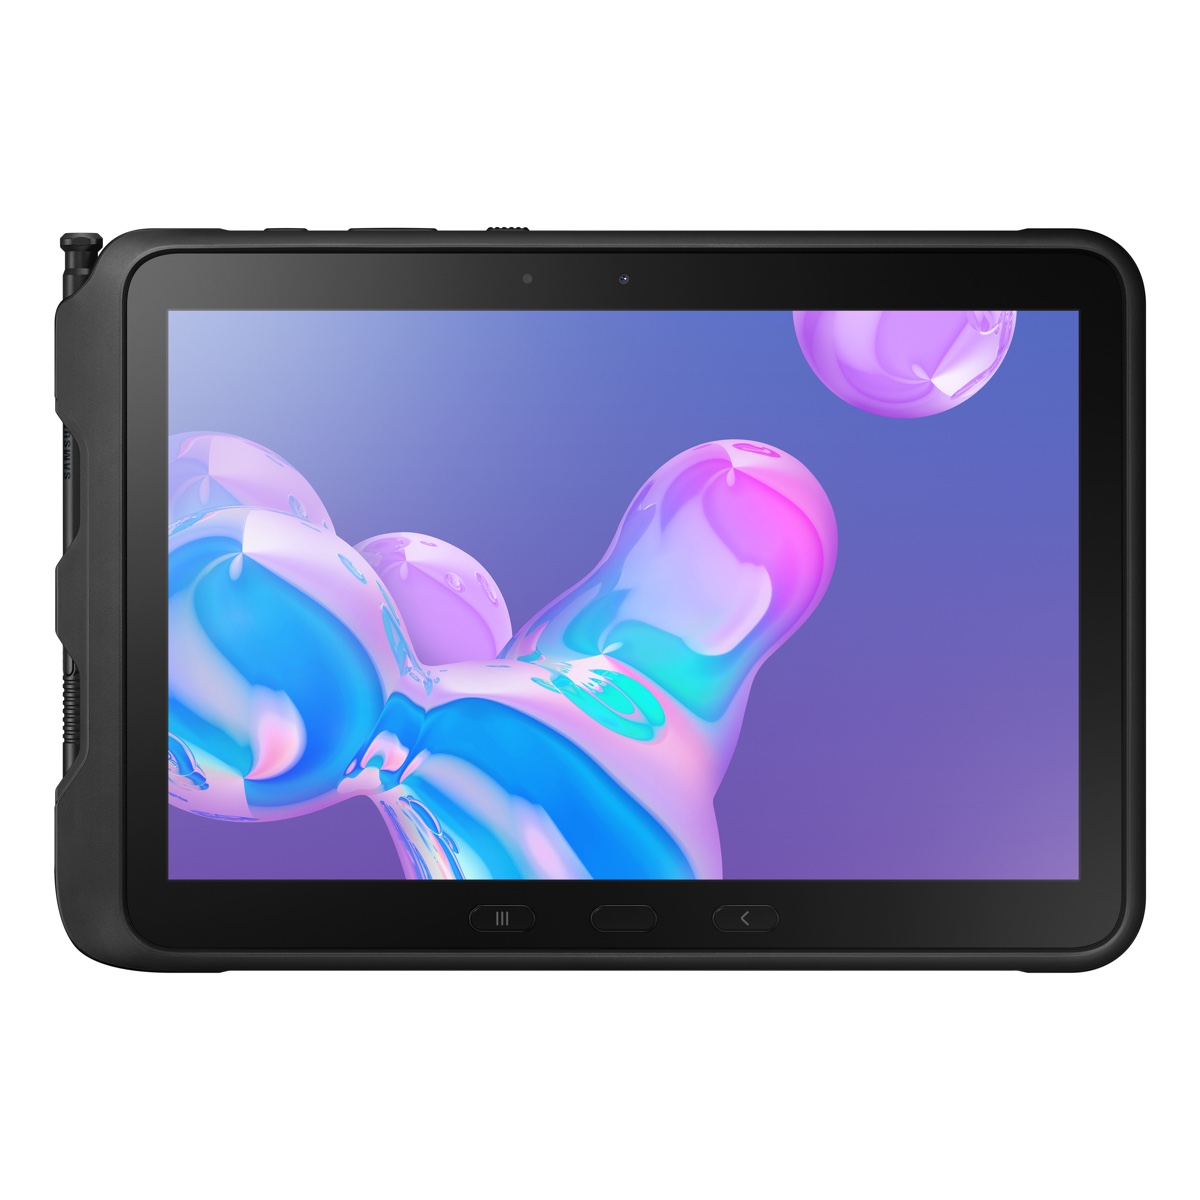 beven zone melk wit SM-T540NZKAXAR | Galaxy Tab Active Pro 10.1" (Wi-Fi) | Samsung Business